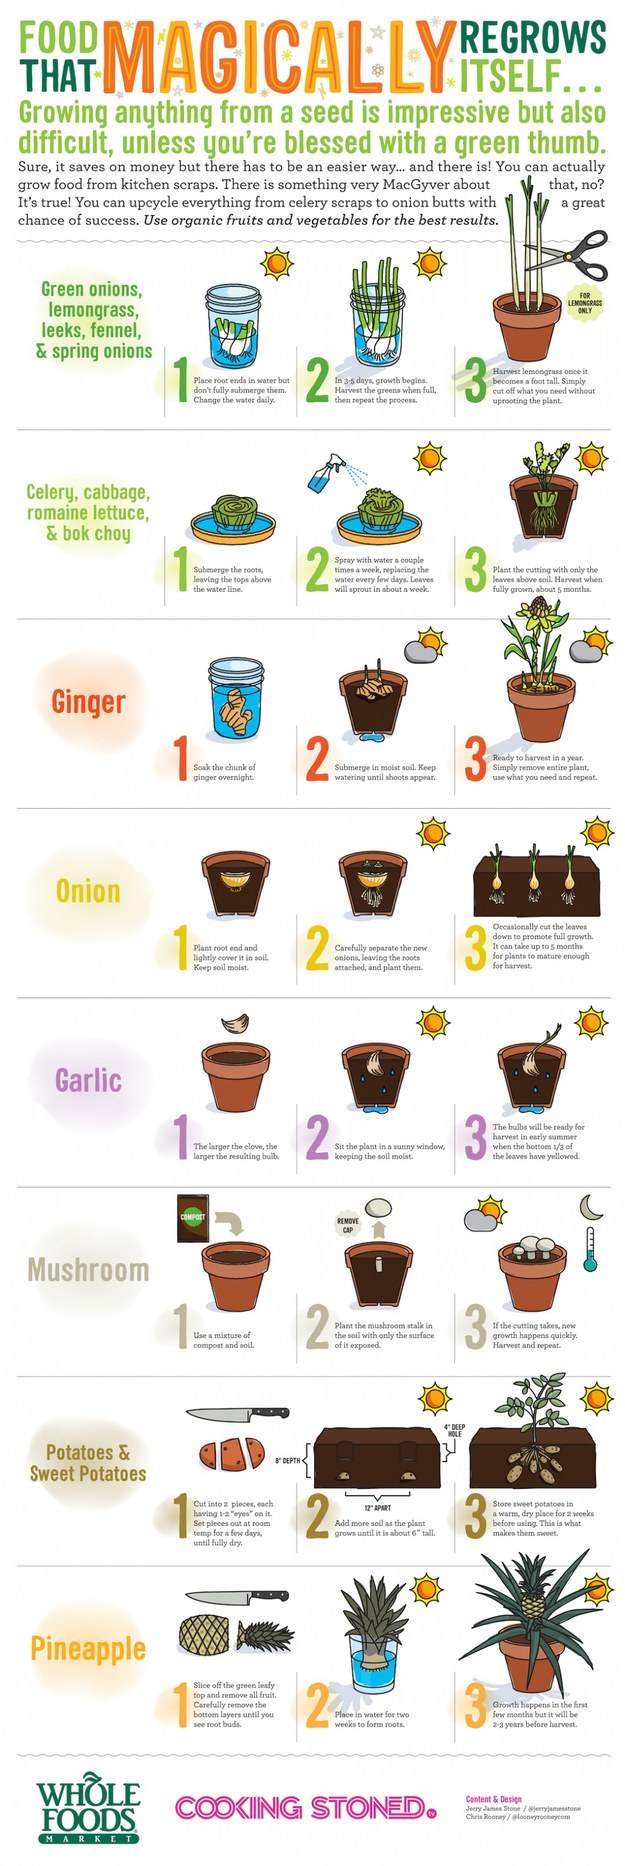 Save some money: Here's a list of food that ~magically~ regrows itself.